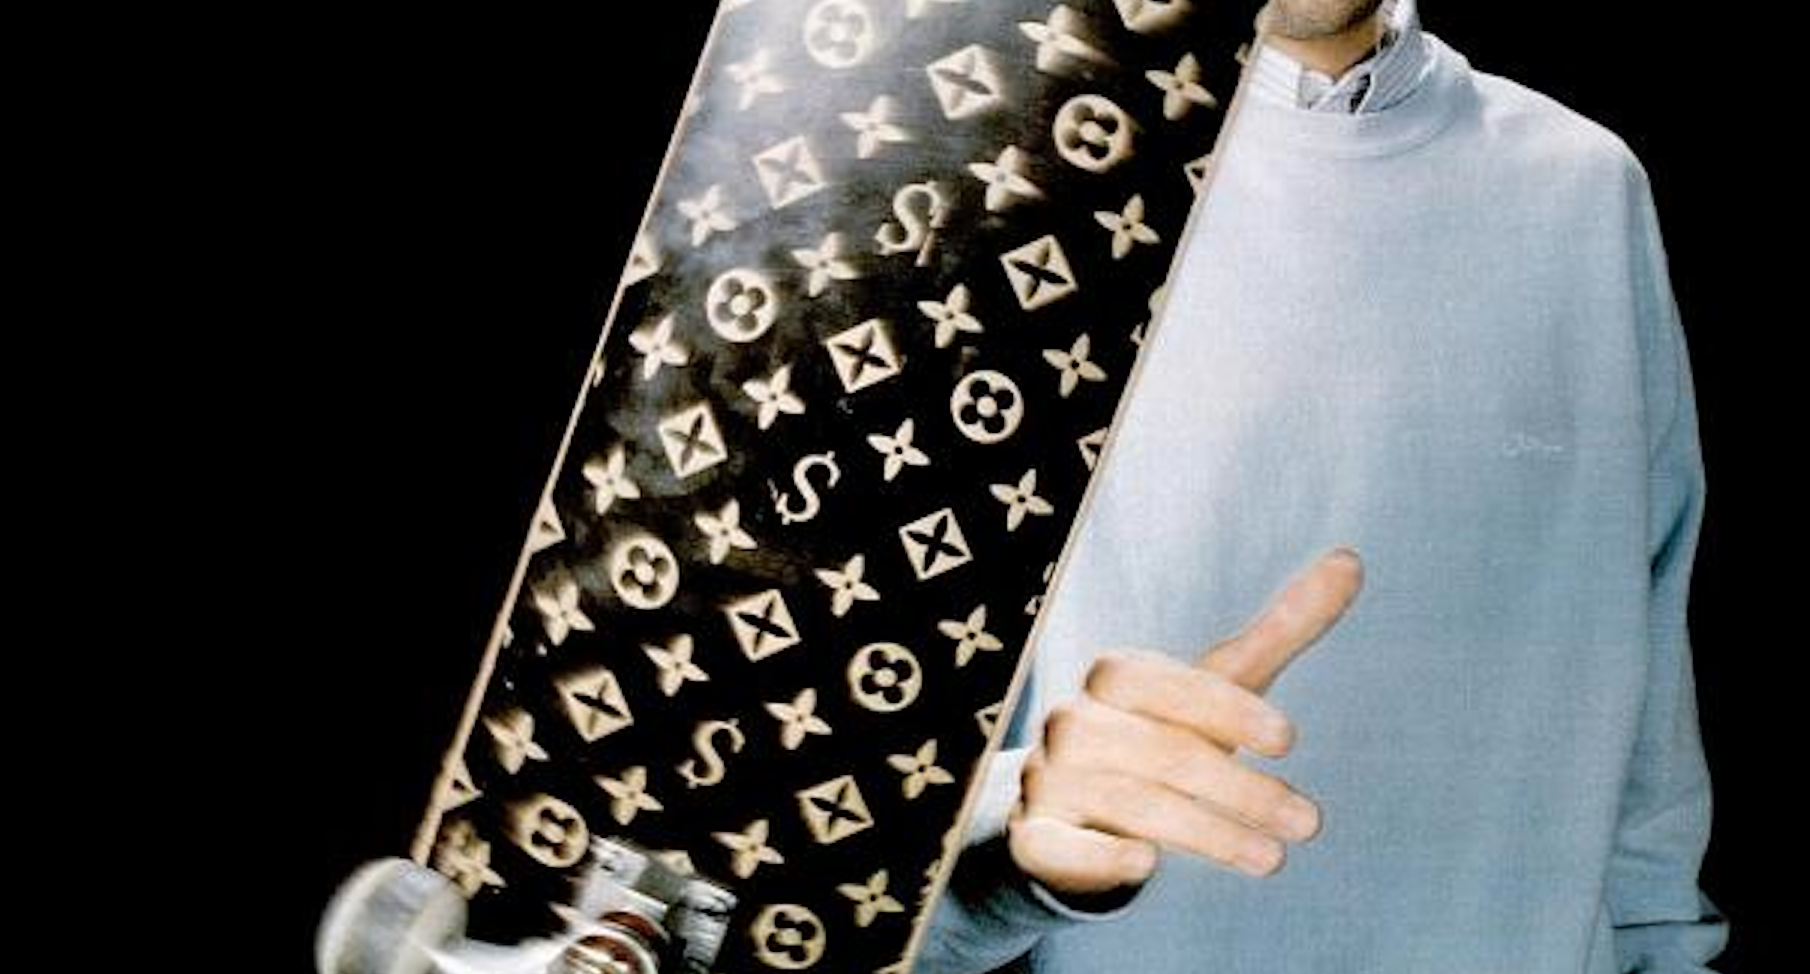 When A Lawsuit Leads To A Mind Blowing Collab: Supreme x Louis Vuitton